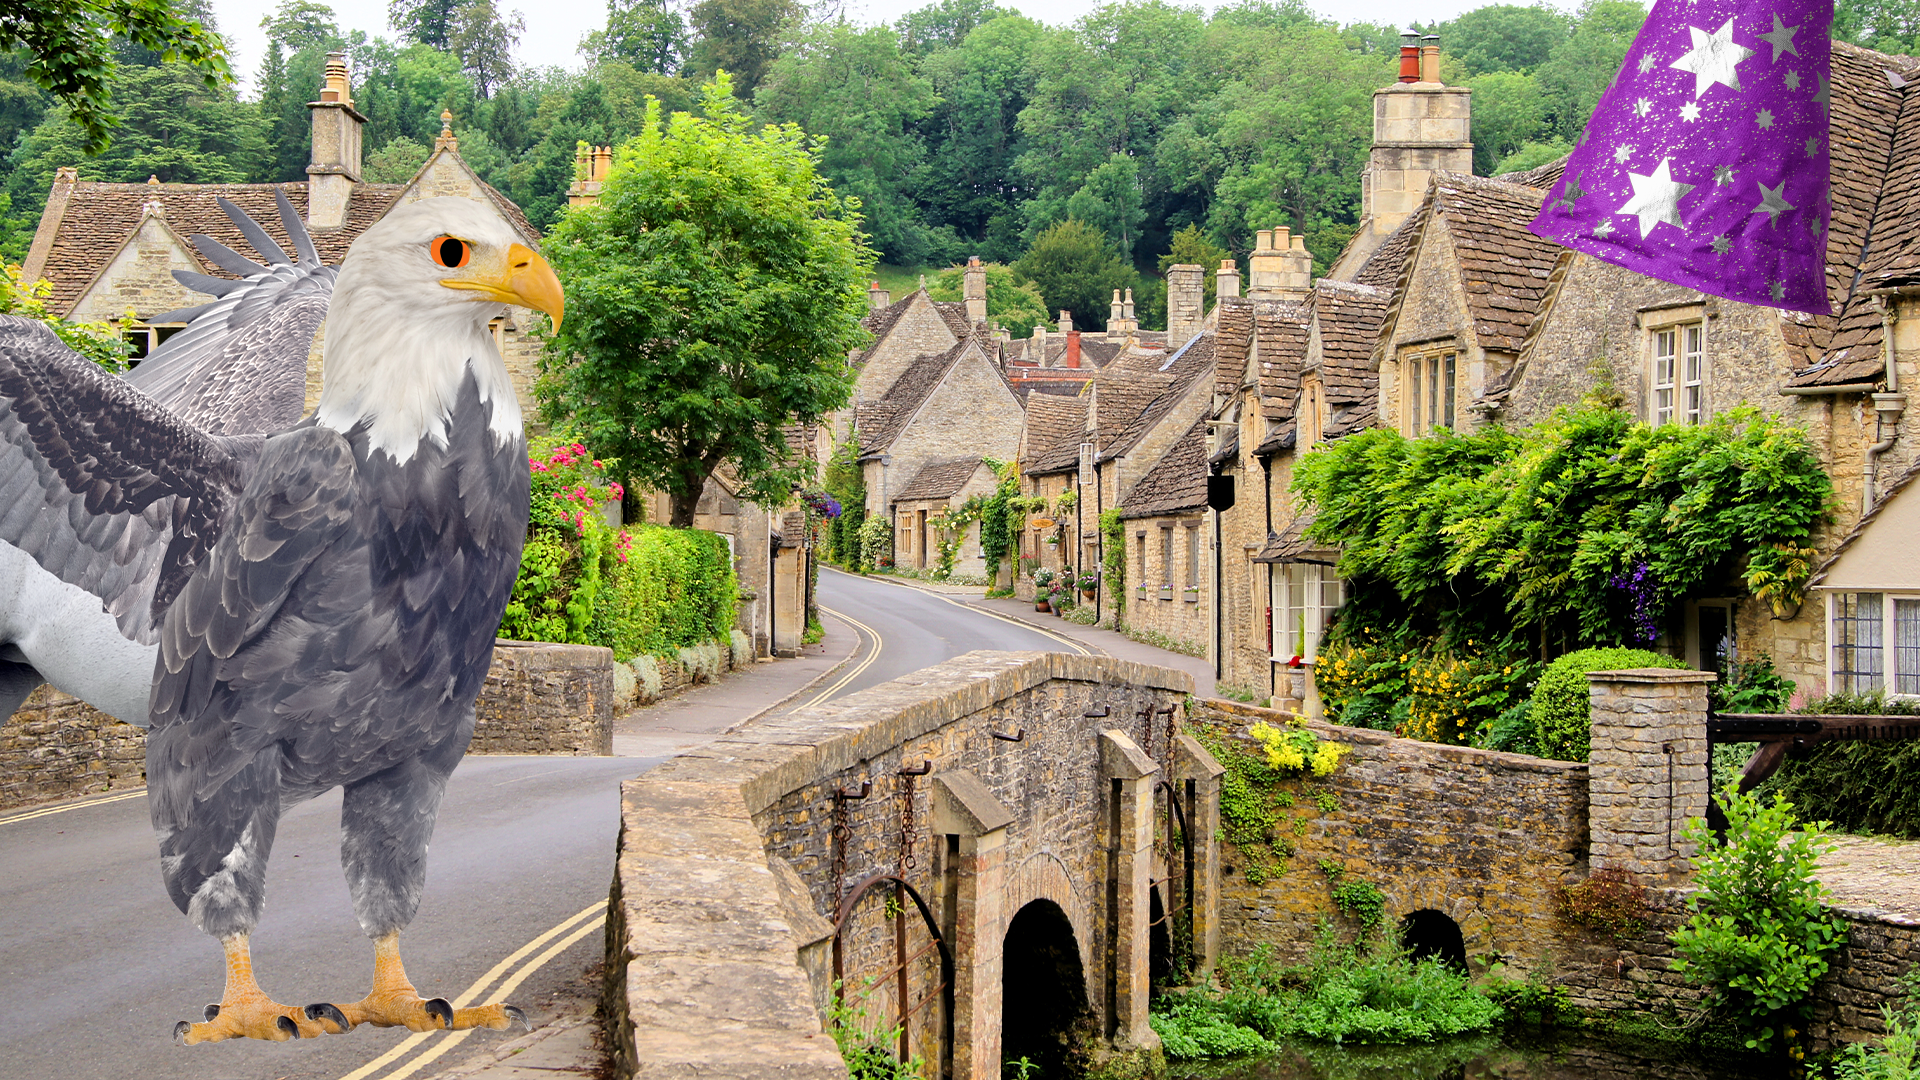 A village with a wizards hat and a hippogriff